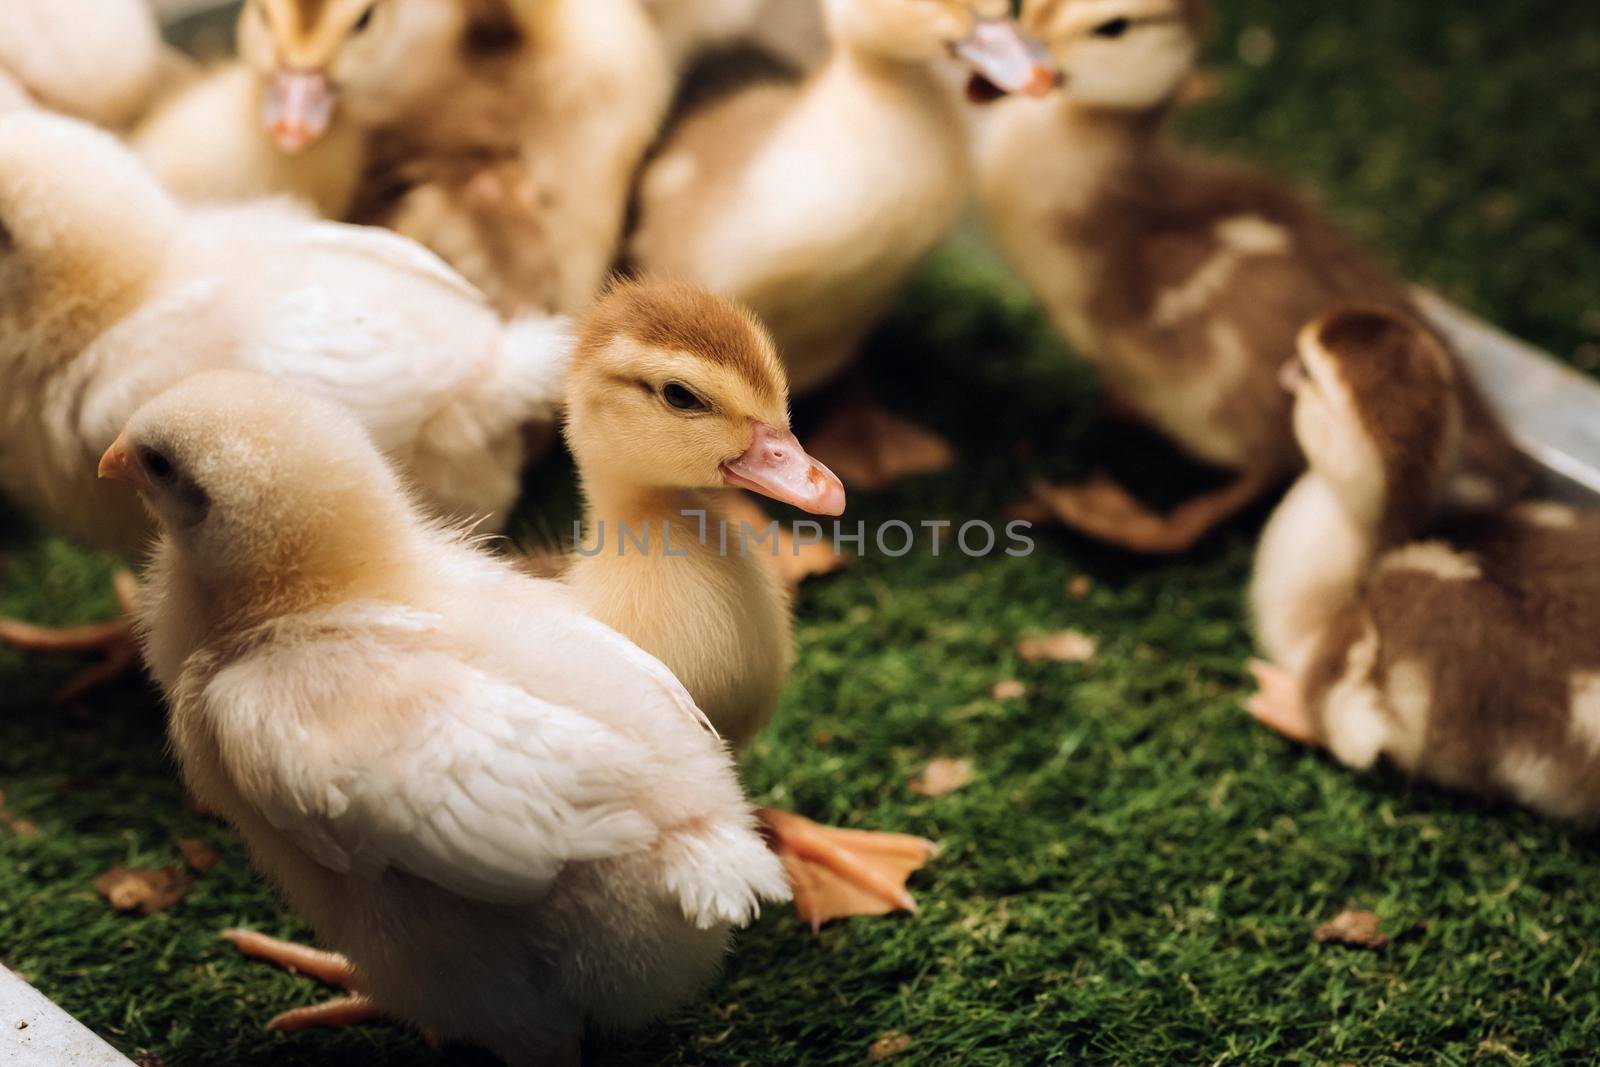 Little chickens and ducklings bask in the sun on the grass by Lobachad